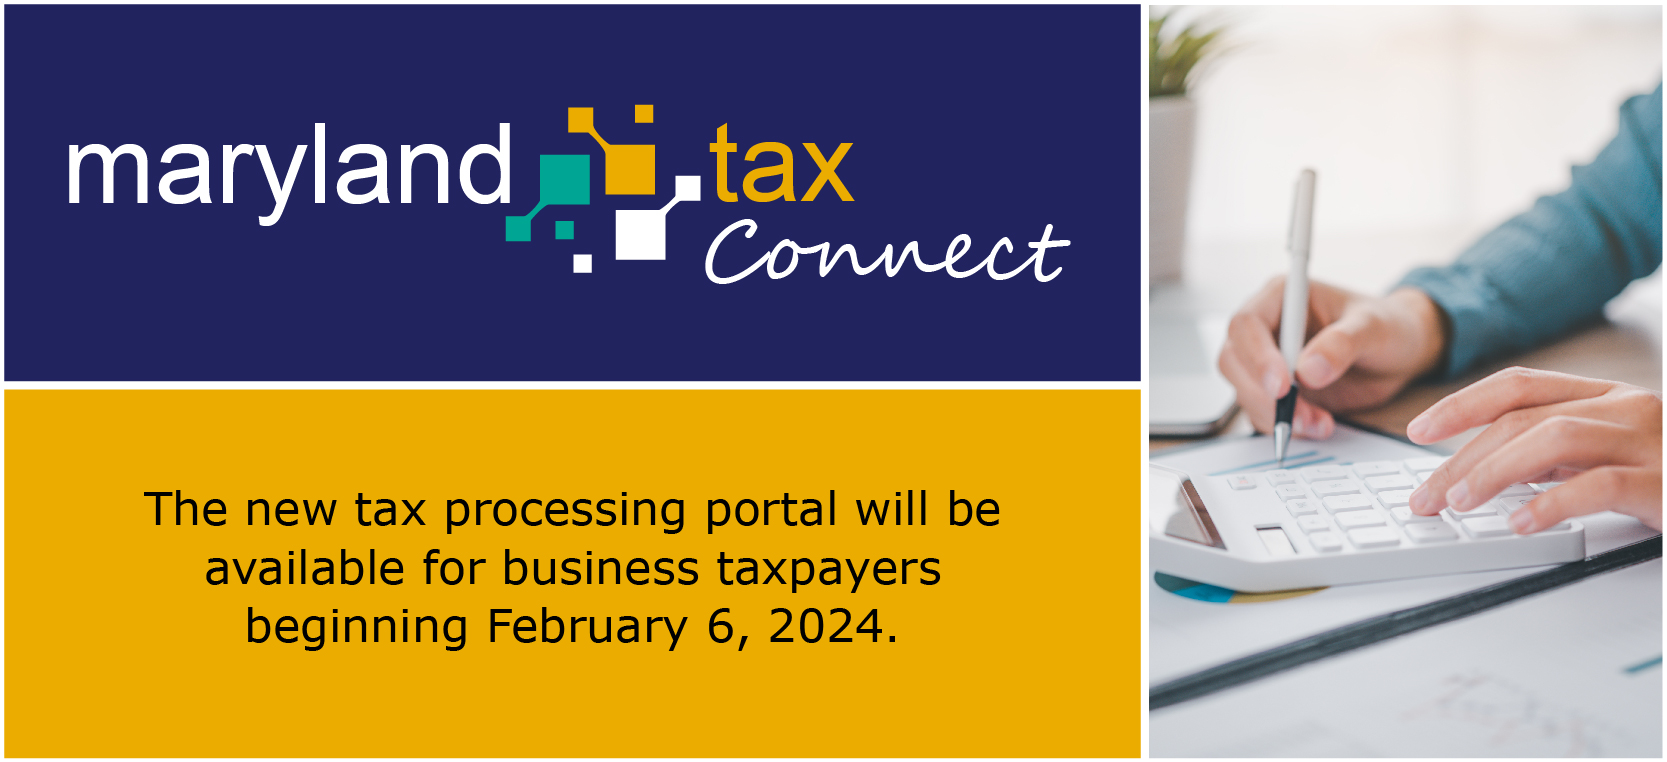 The new tax processing portal will be available for business taxpayers beginning February 6, 2024. 
Maryland Tax Connect